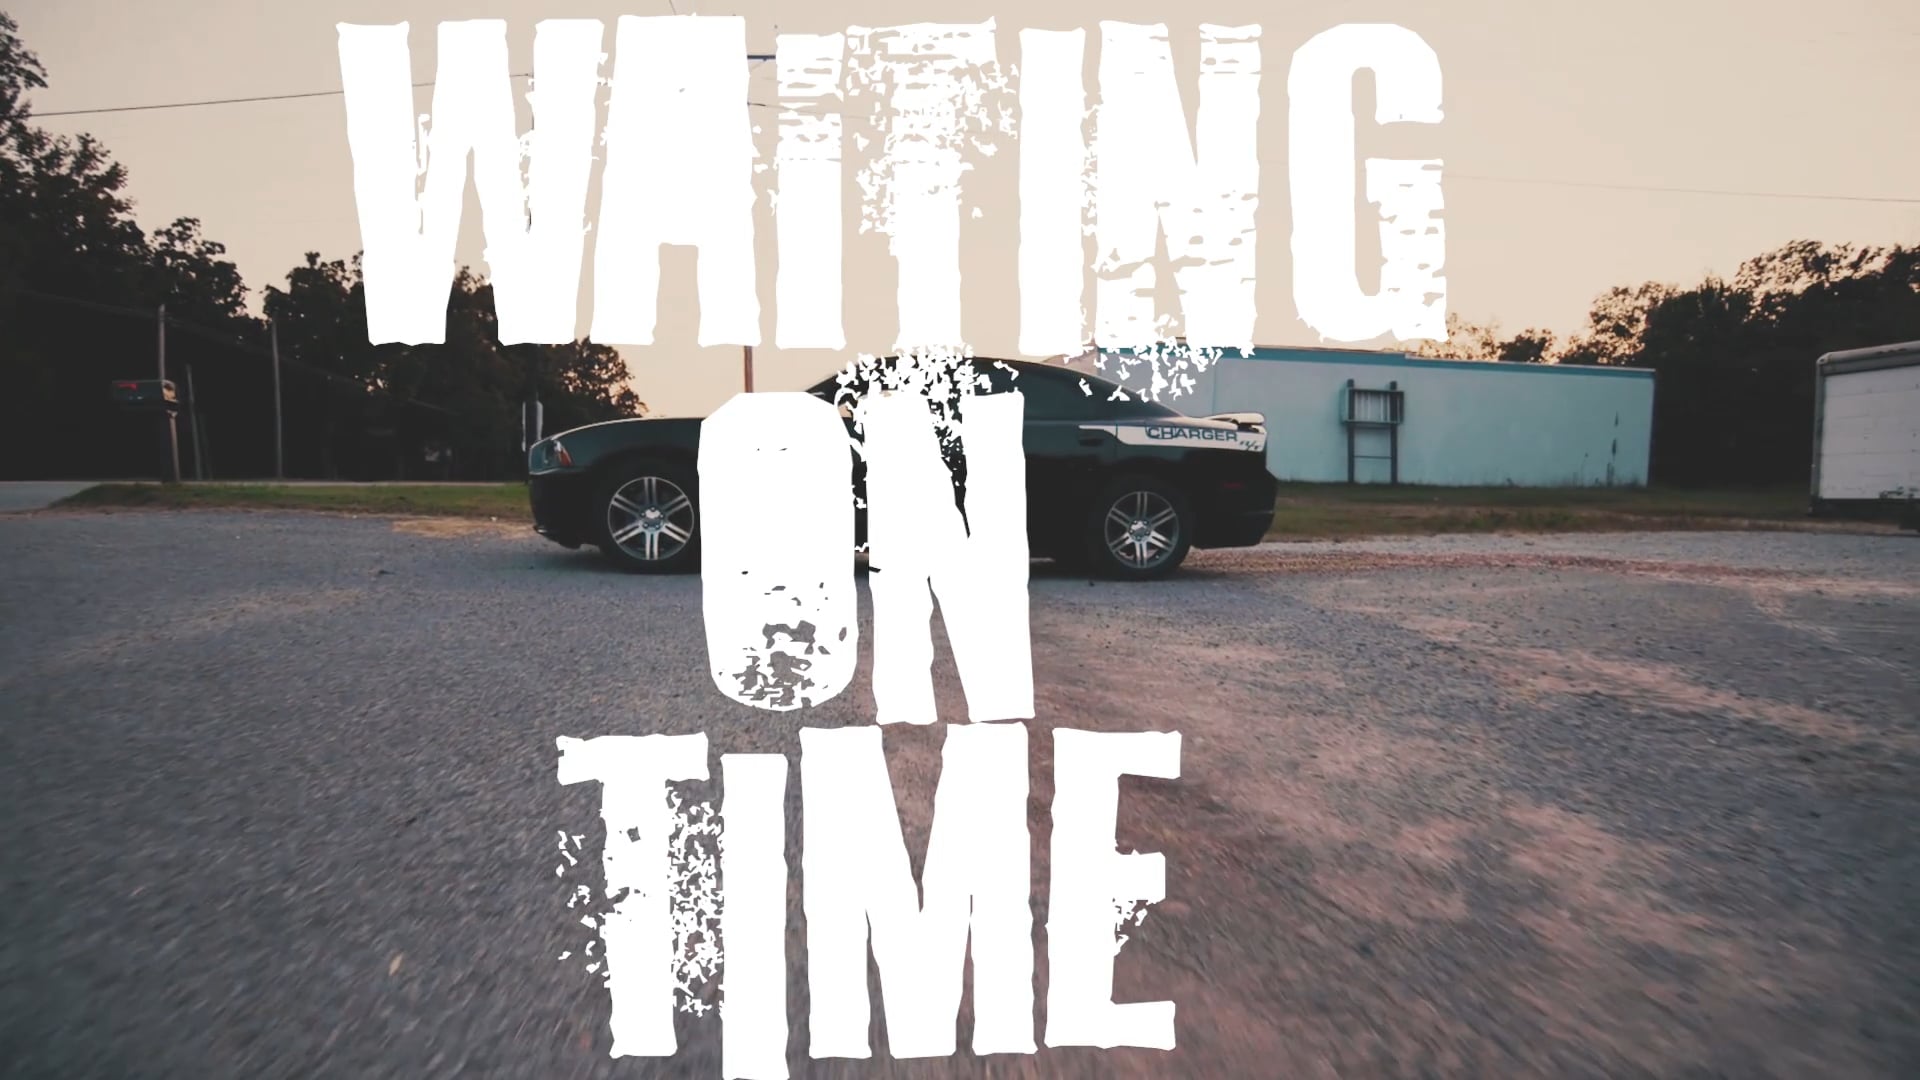 Charlie Bonnet III - Waiting on Time